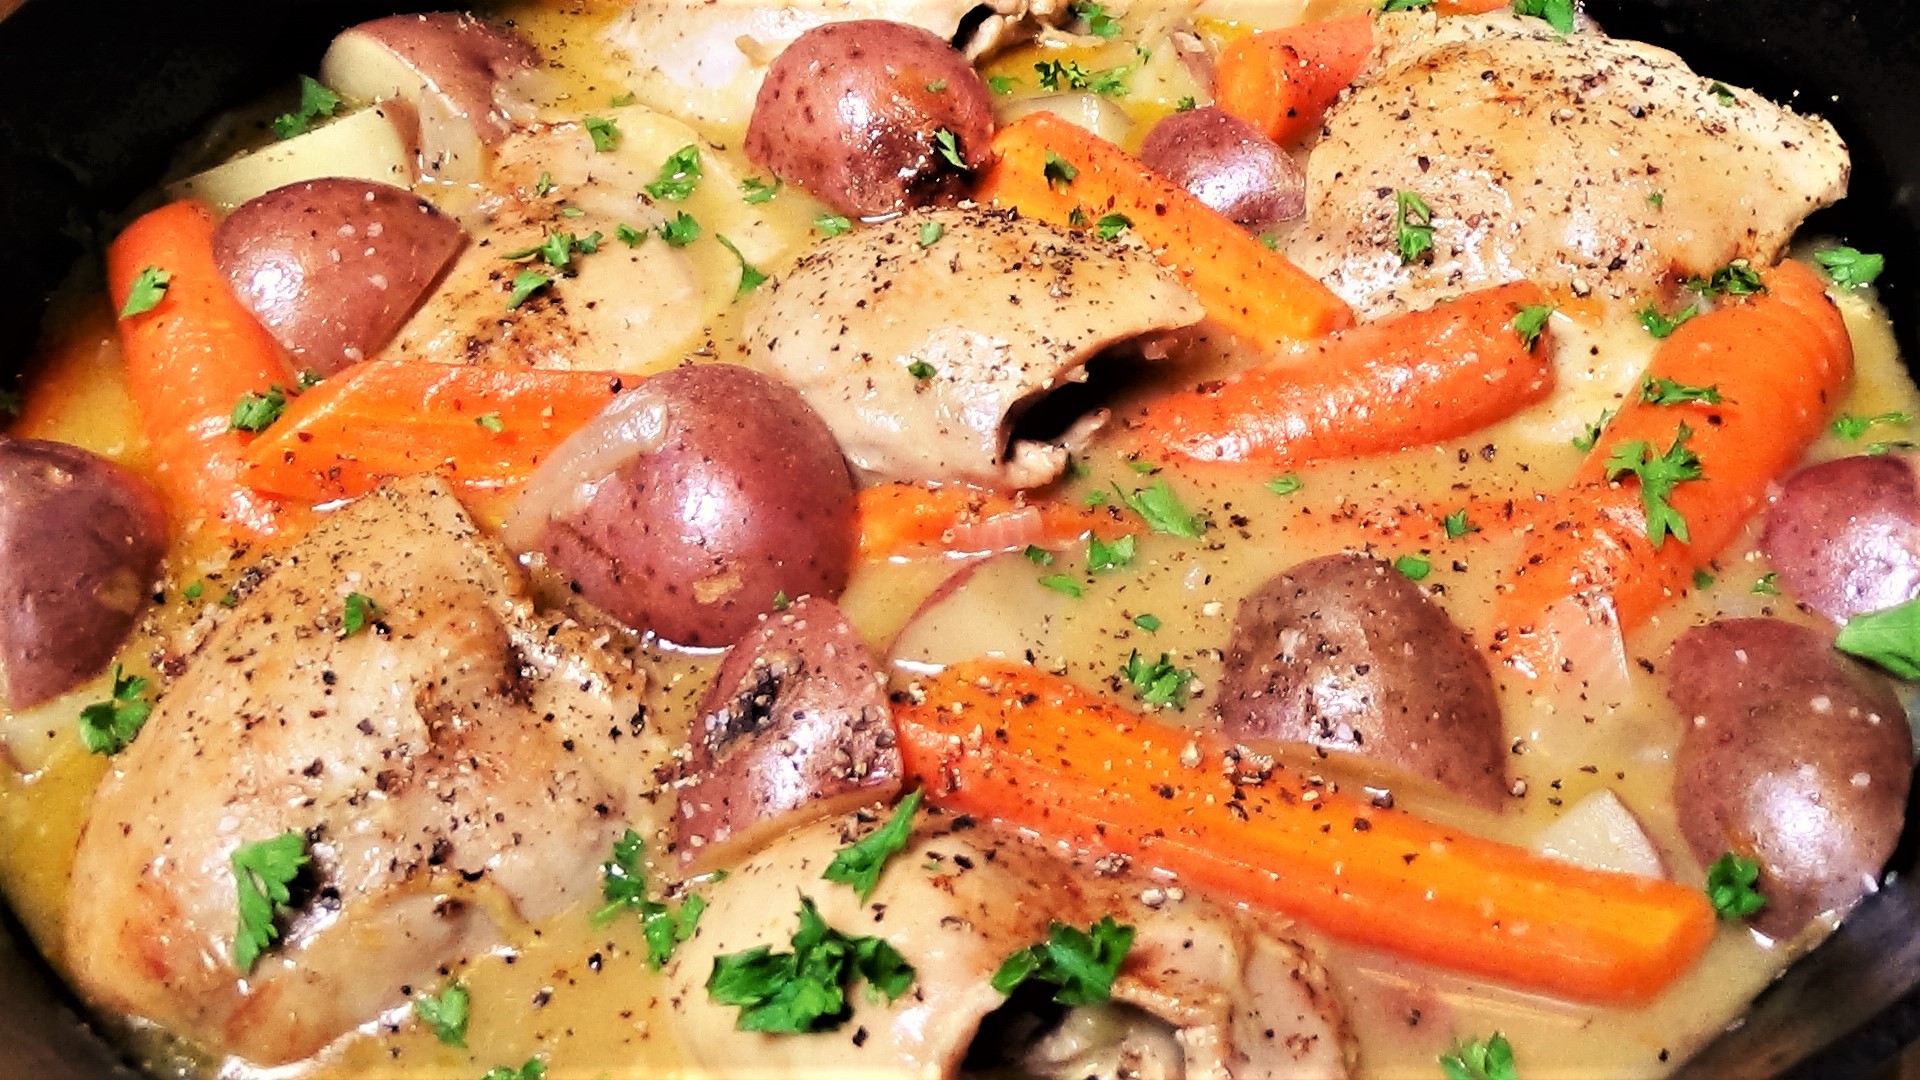 Braised Chicken Thighs with Carrots and Potatoes